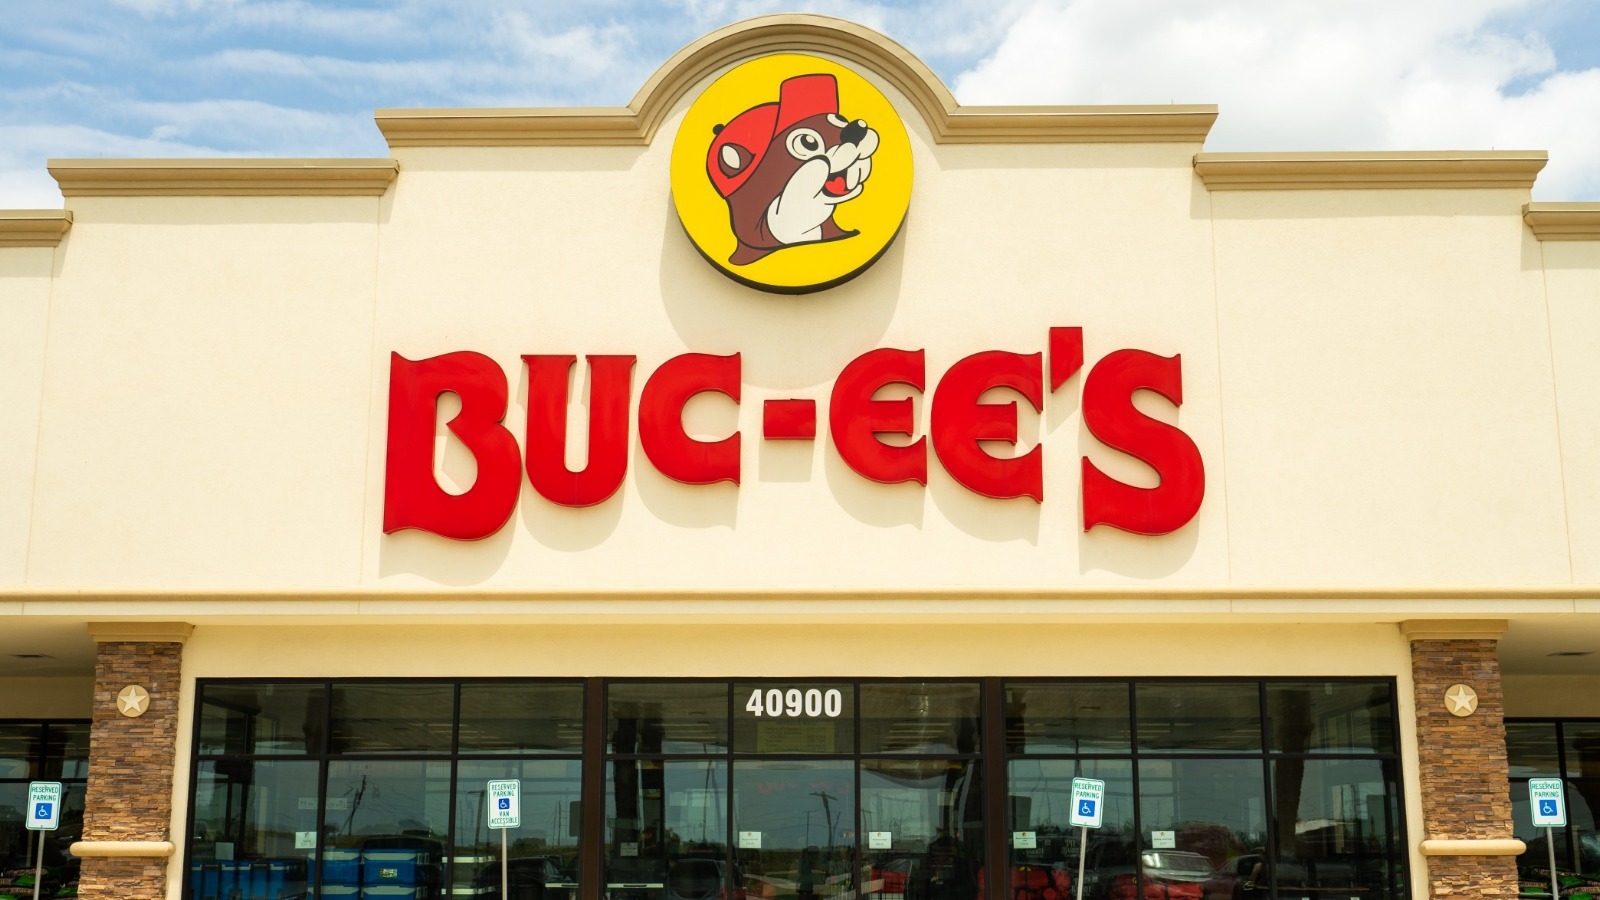 The Untold Truth Of Buc Ees